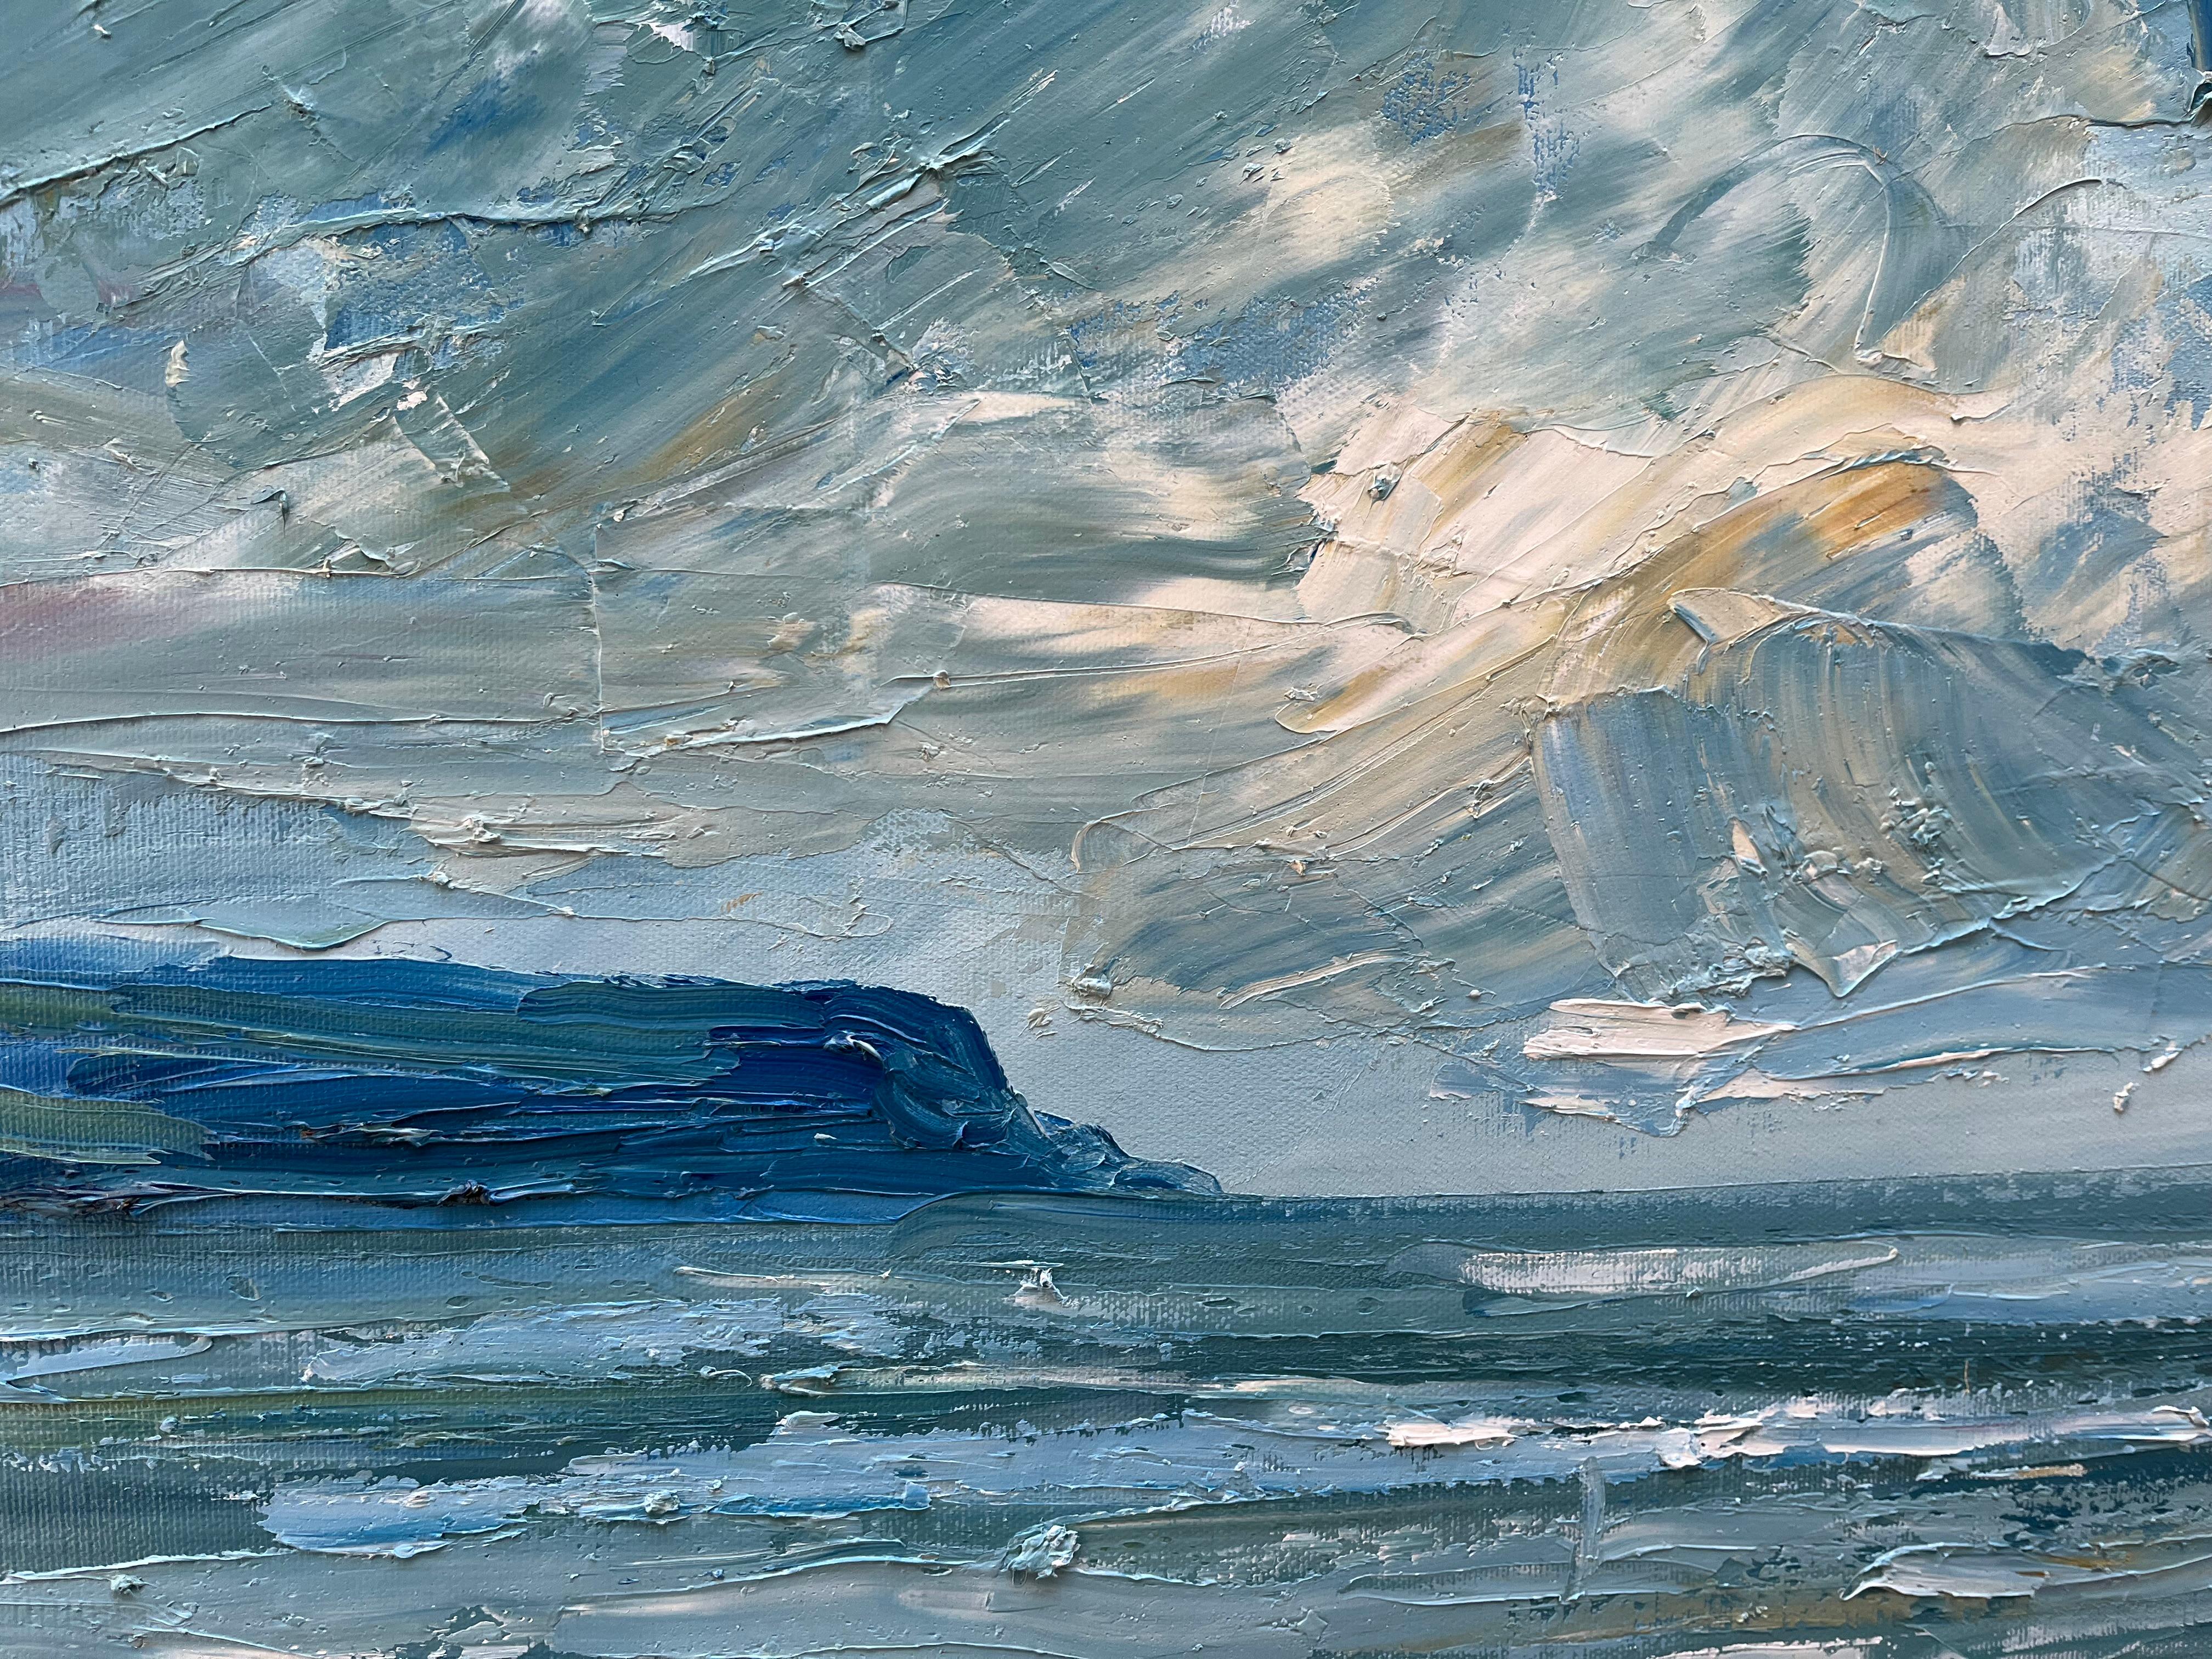 Daymer Bay from Hawker’s Cove, Padstow, Cornwall, Original painting, Coast, Sea - Blue Abstract Painting by Rupert Aker